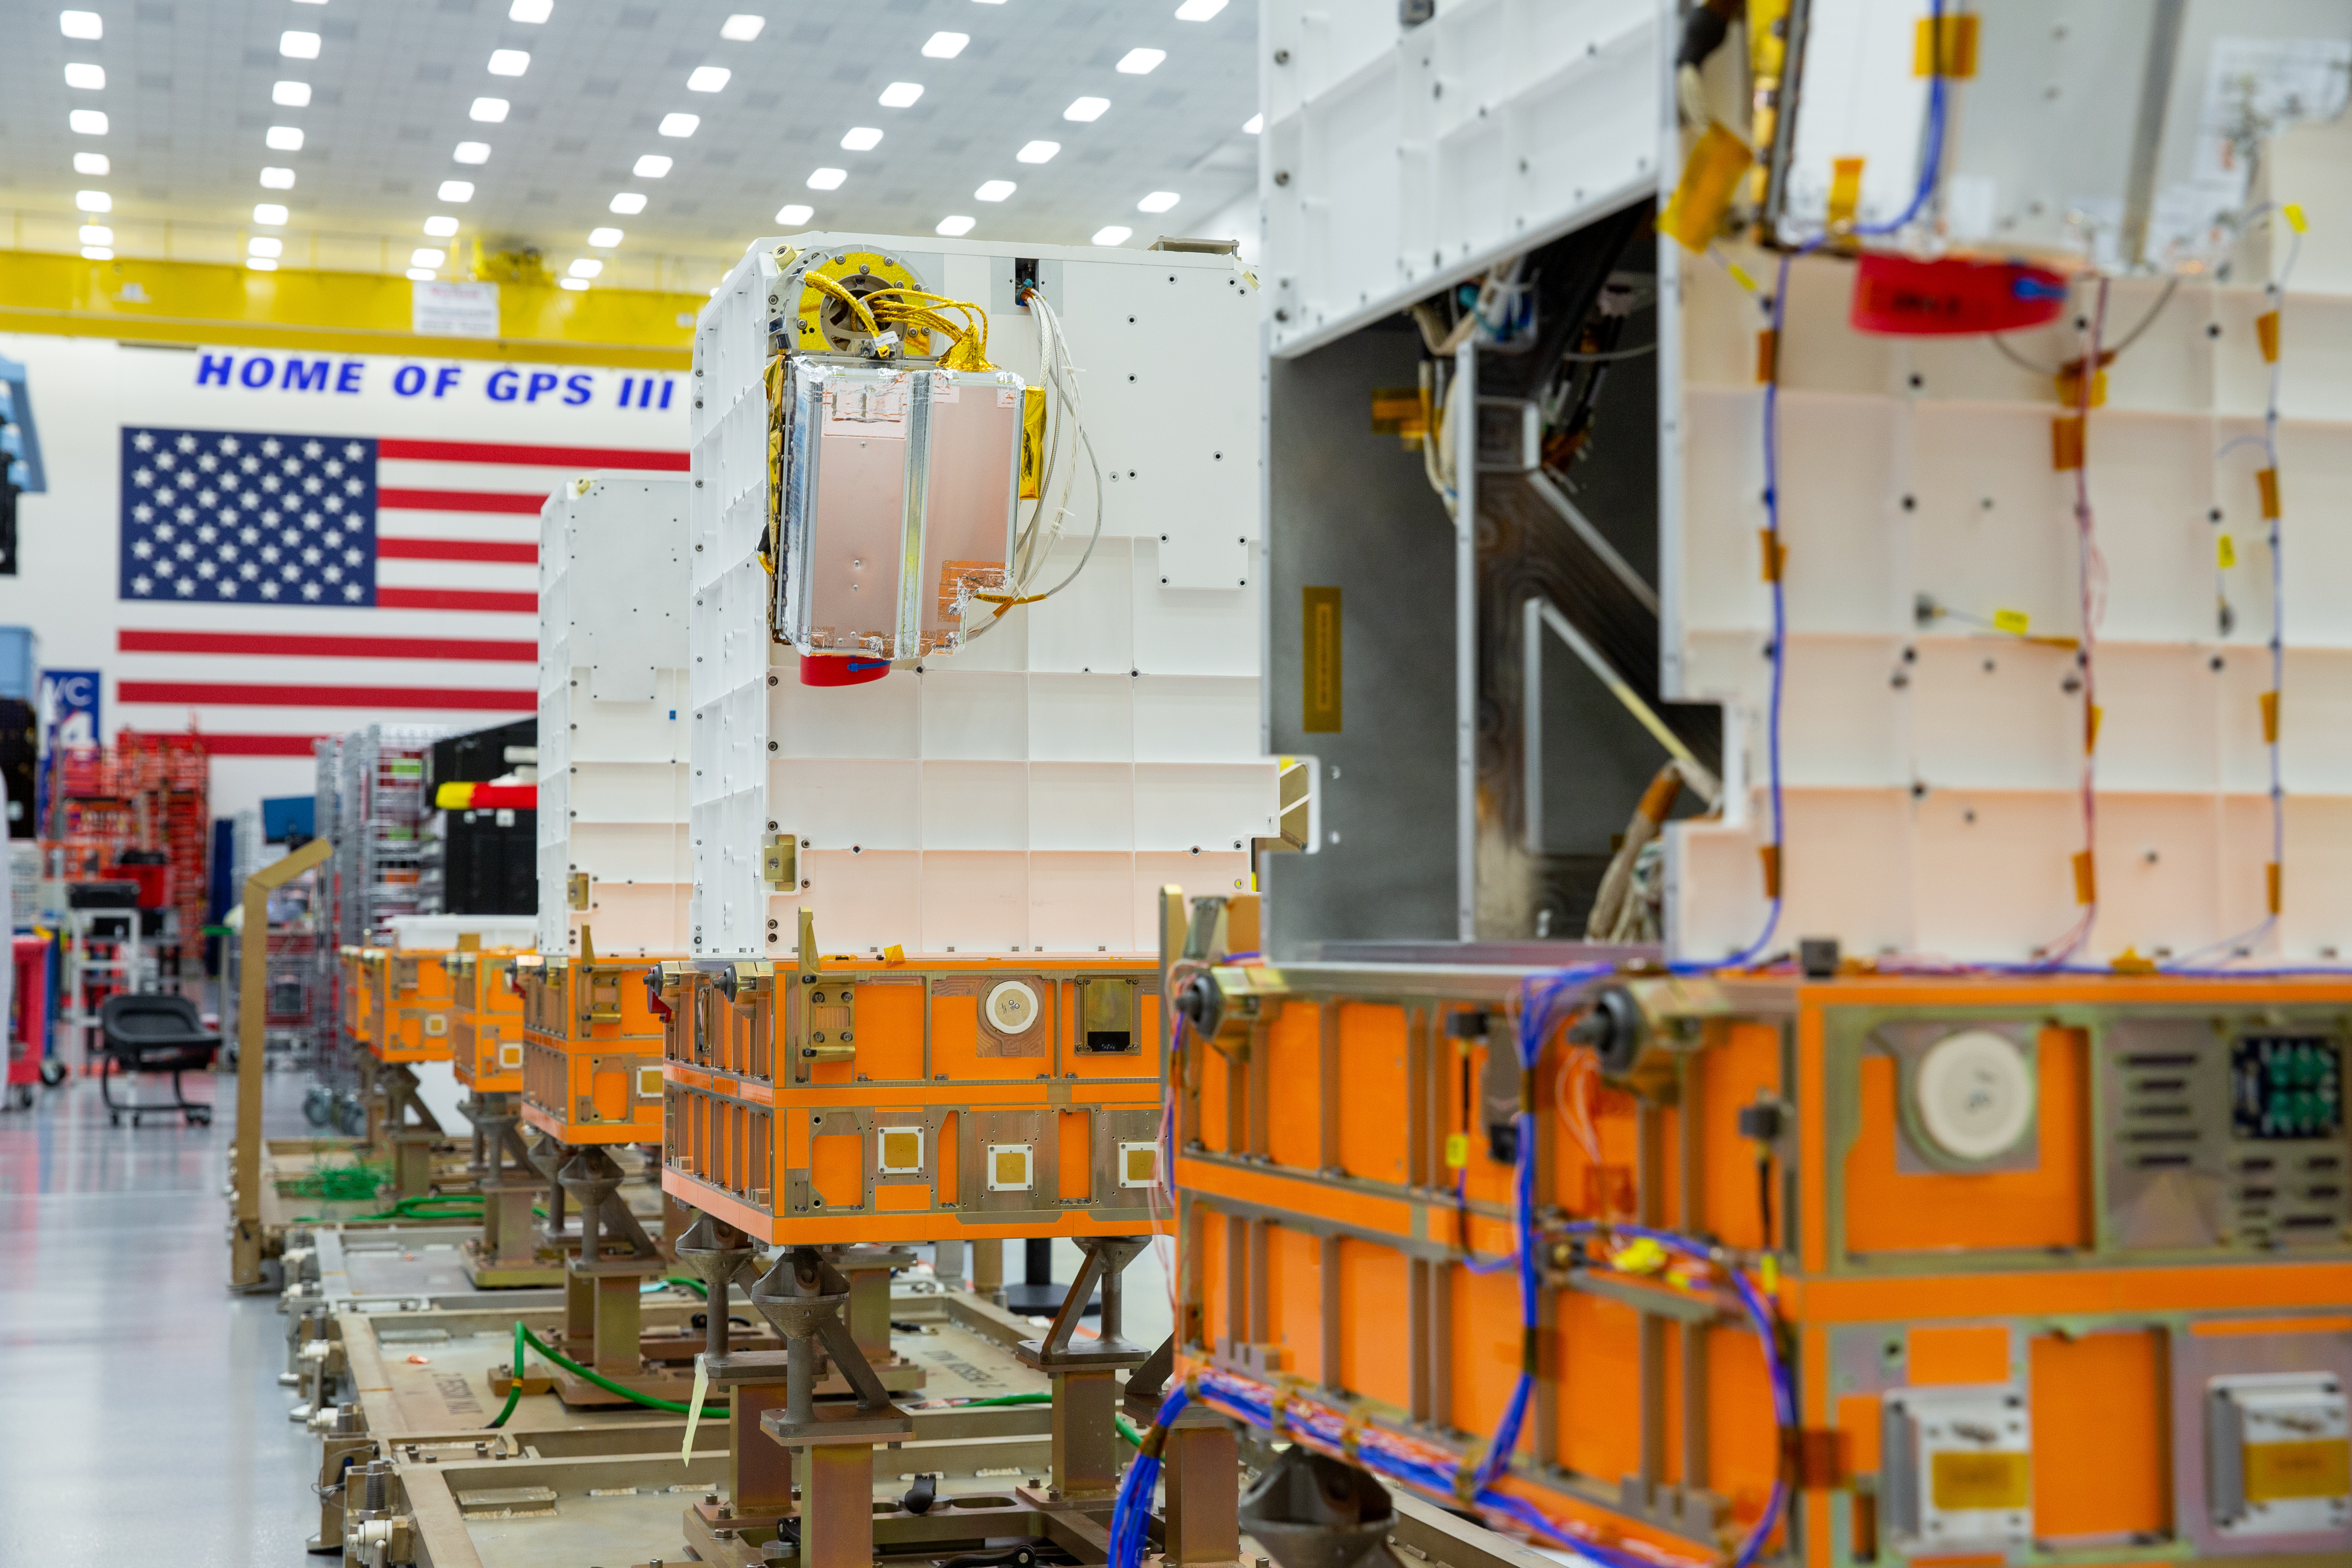 Lockheed Martin’s Tranche 0 Transport Layer satellites are seen in one of its processing facilities